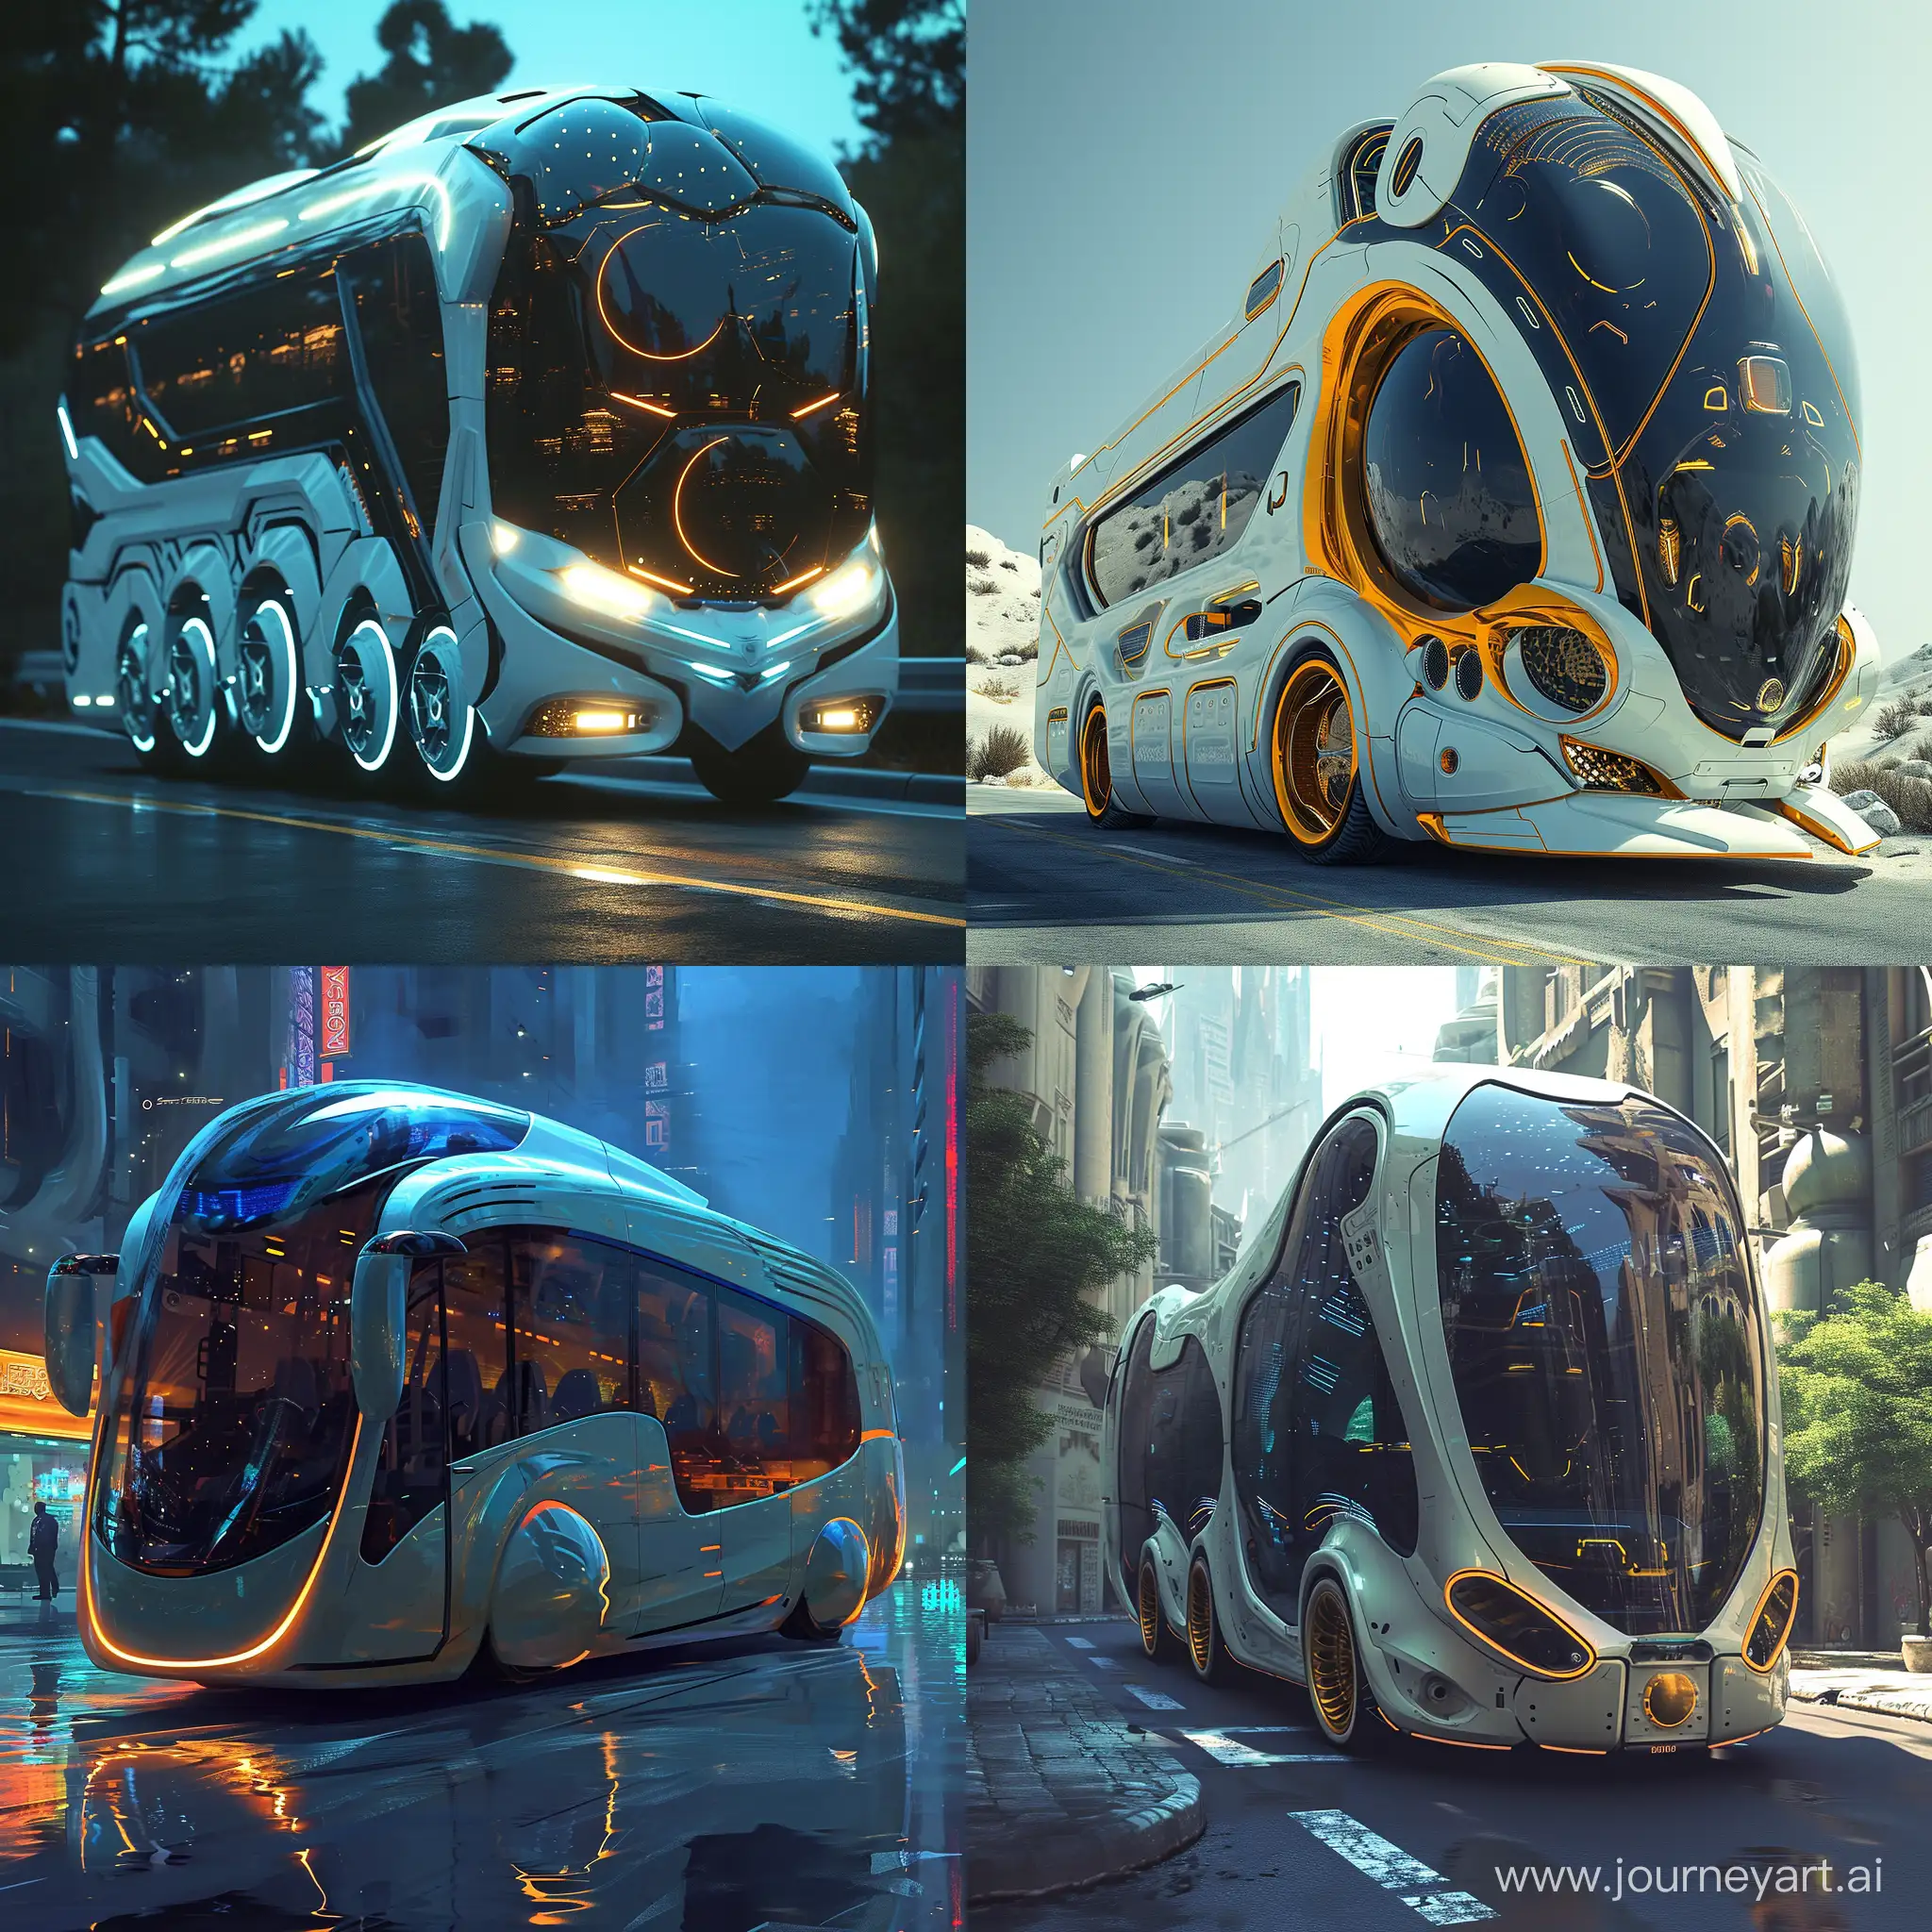 Futuristic-Bus-with-Unusual-Shapes-SciFi-Art-on-ArtStation-and-DeviantArt